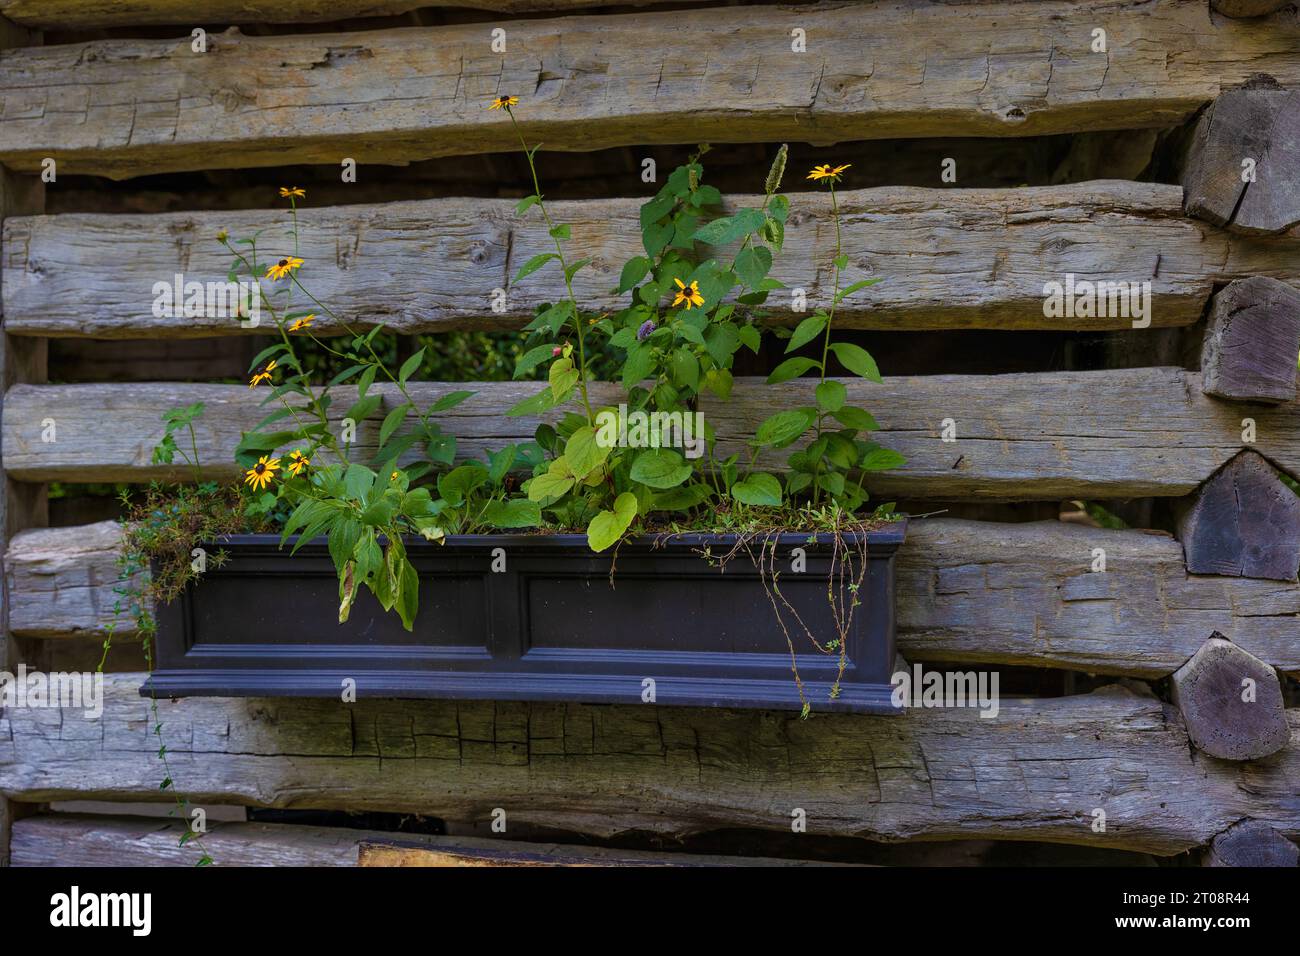 Close up of plants and flowers in a wall planter on the side of a wood wall. Stock Photo